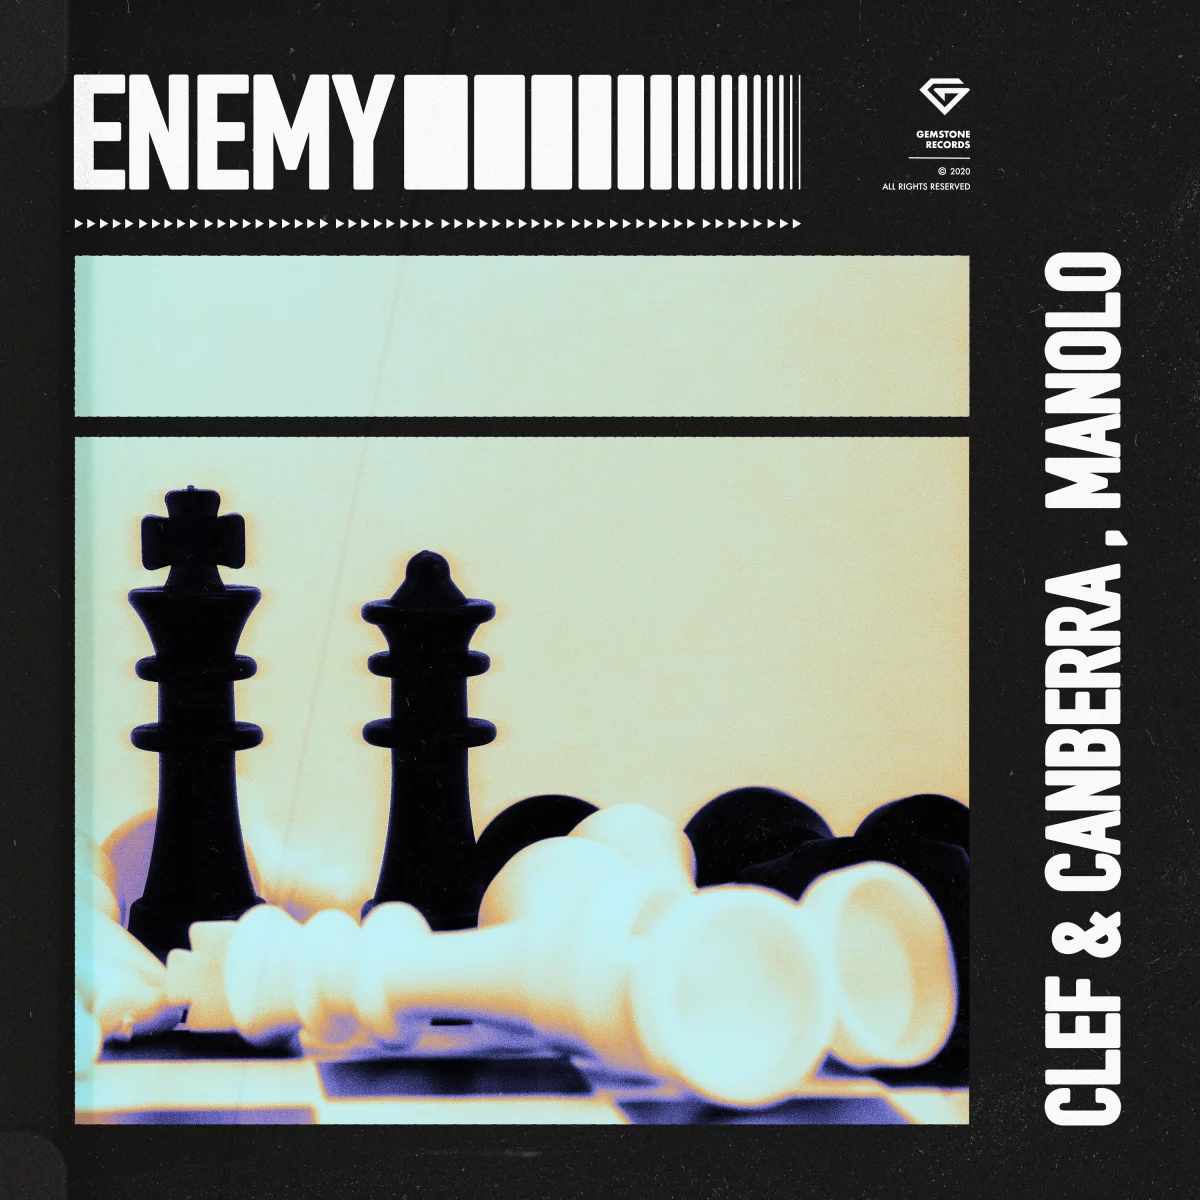 Enemy - Clef & Canberra⁠, Manolo